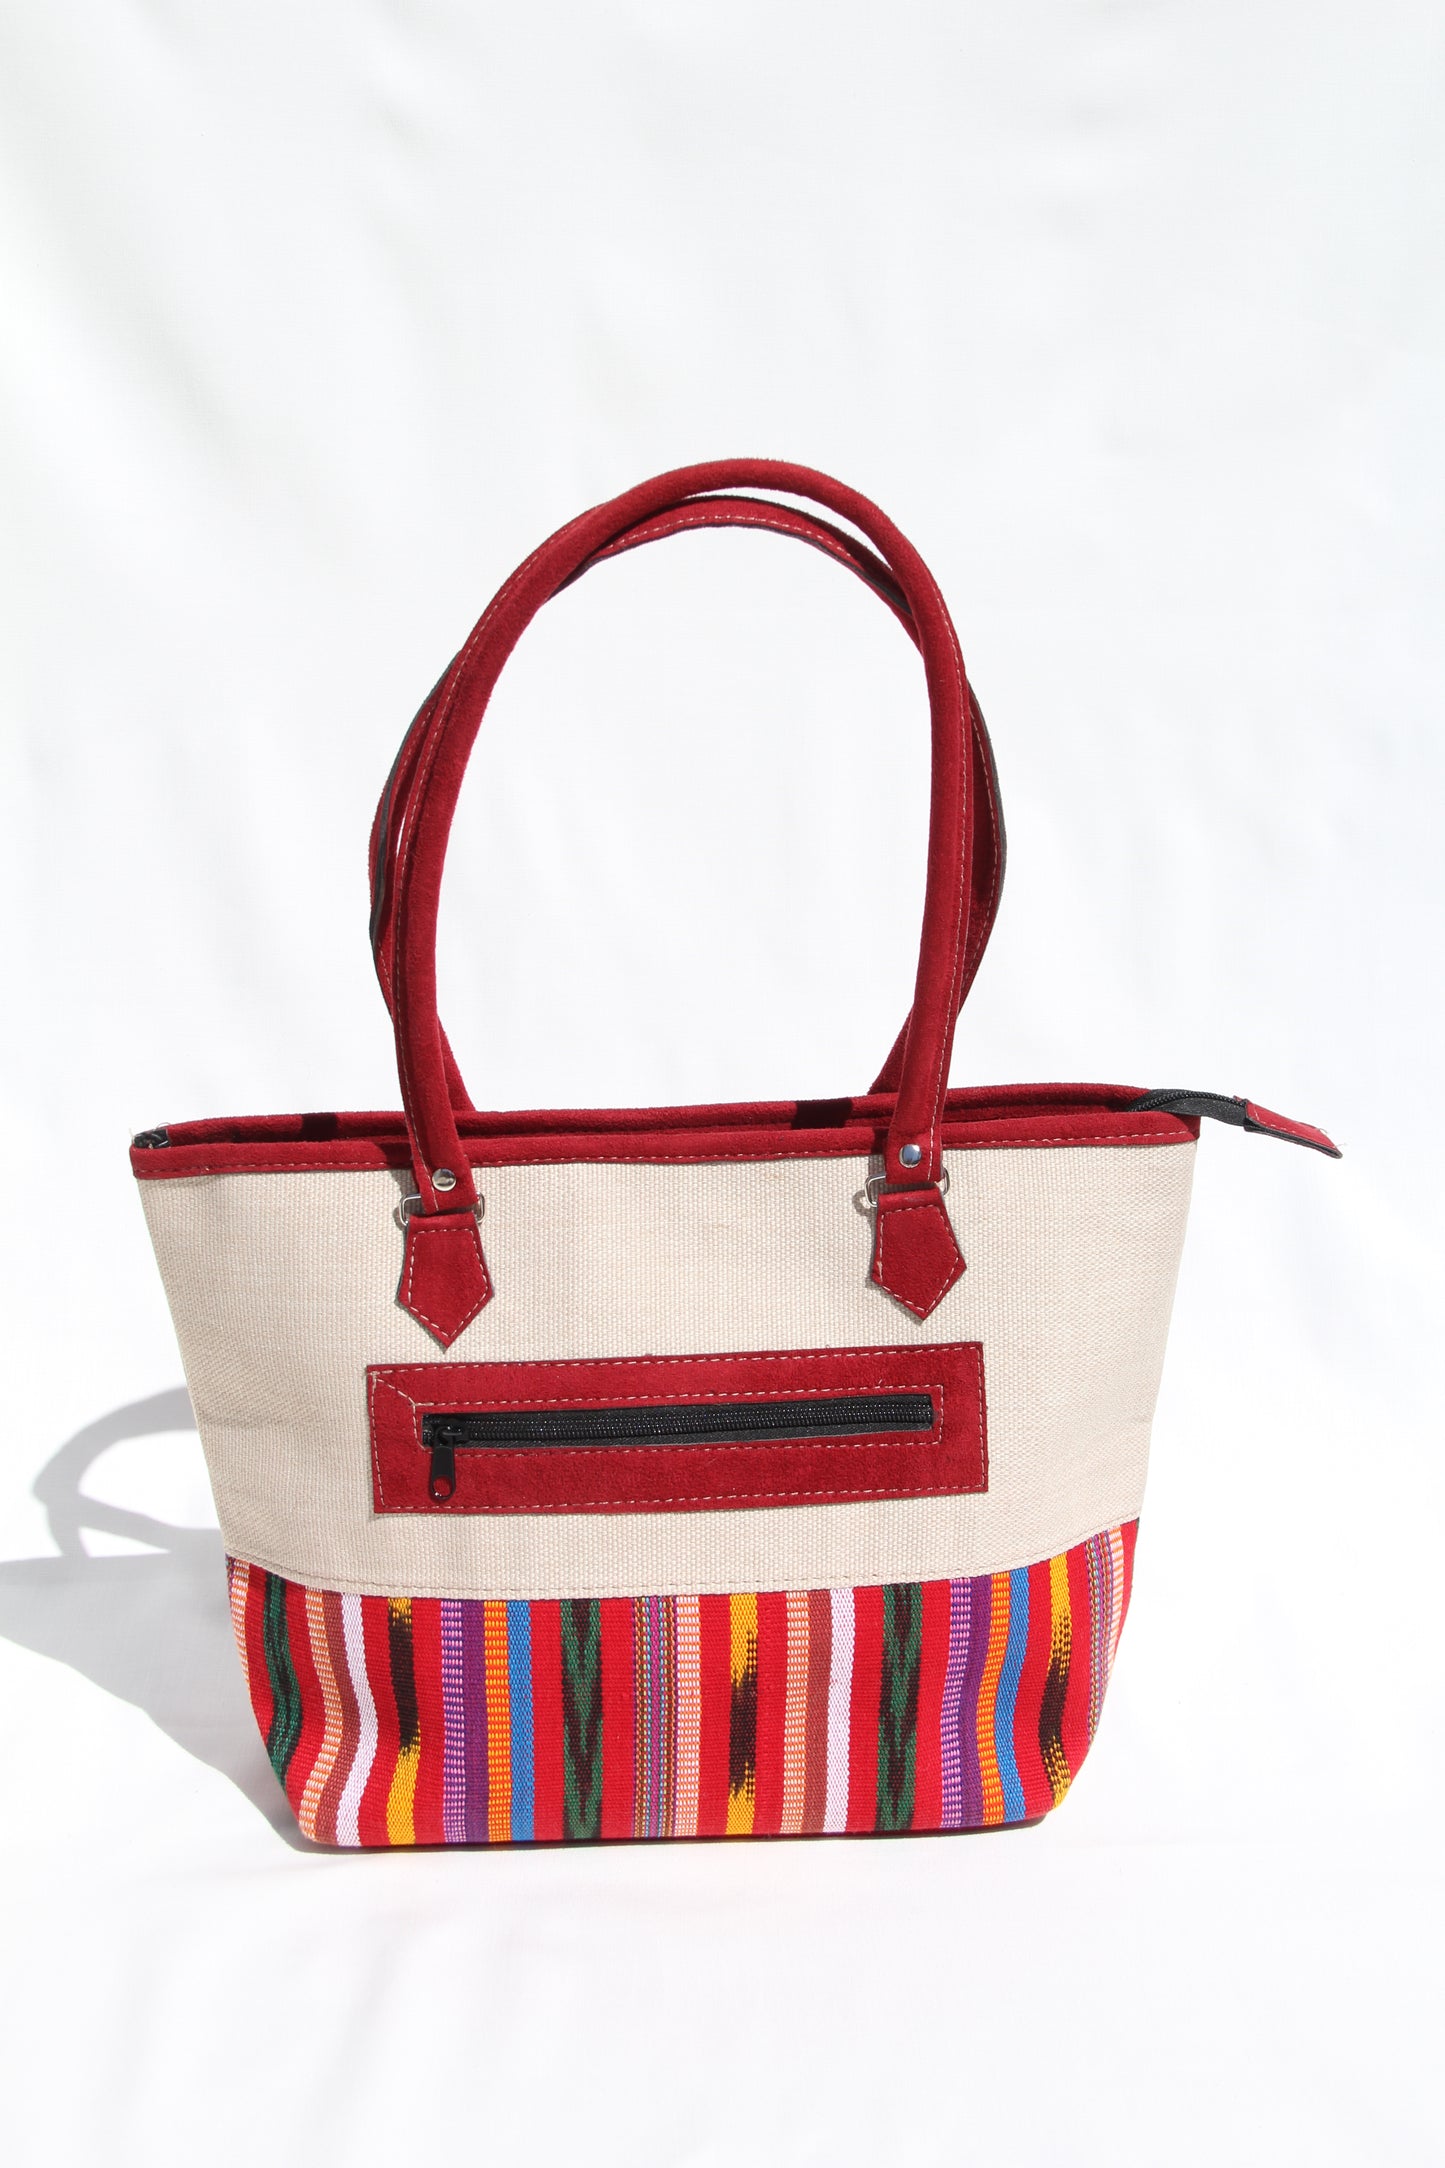 Back view of a handwoven handbag with a bottom panel of intricate Guatemalan fabric with red faux suede shoulder straps and top zipper closure to protect essential items from falling out. the prefect travel, hiking or beach bag unique bag great for your next destination boho bag and hippie style bag a great standout accessories made in Guatemala